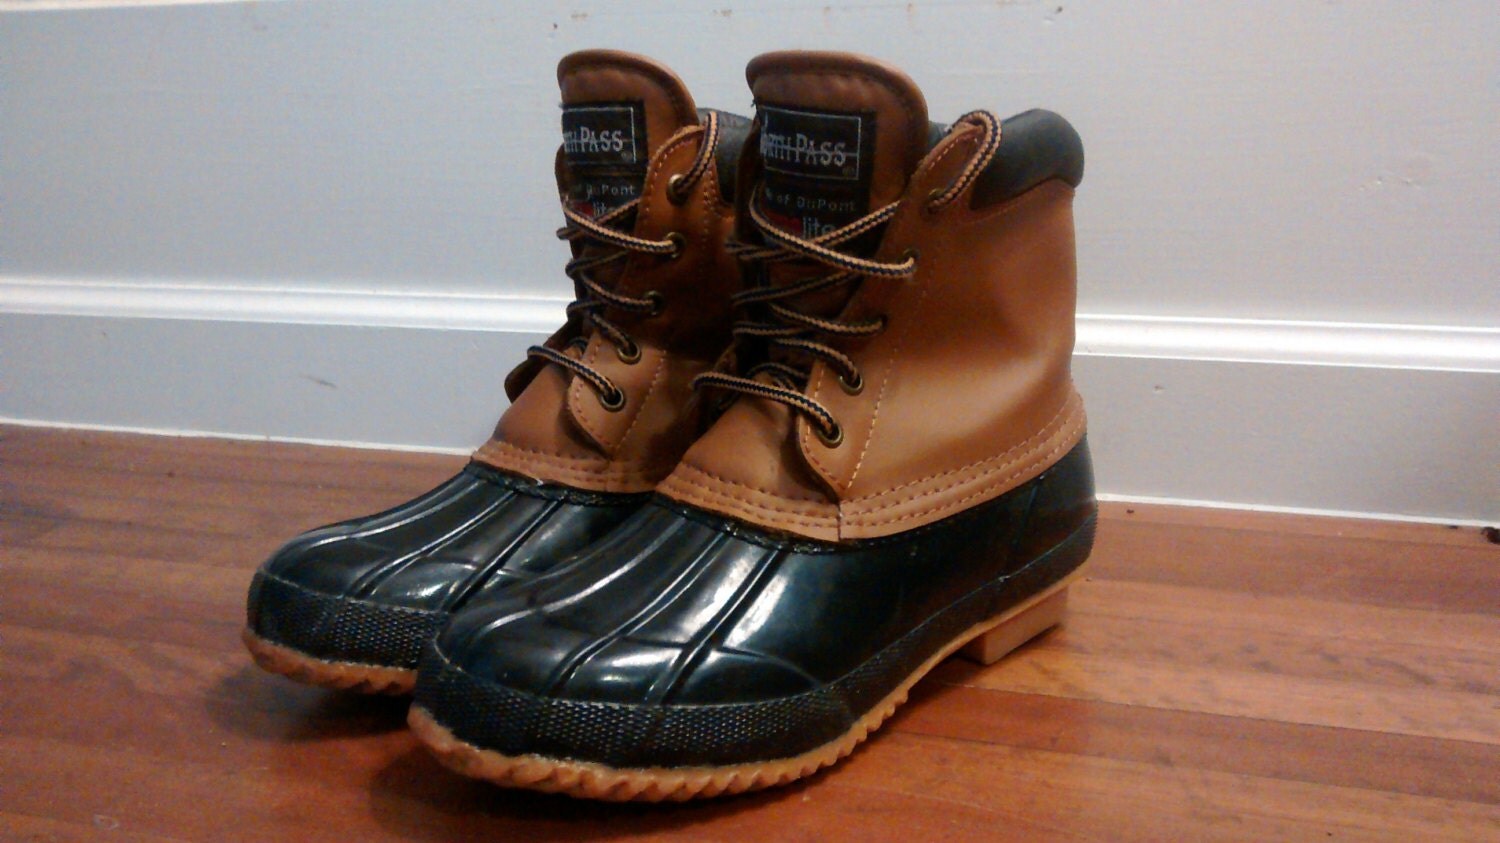 Vintage duck boots Women size 7 thermolite north pass